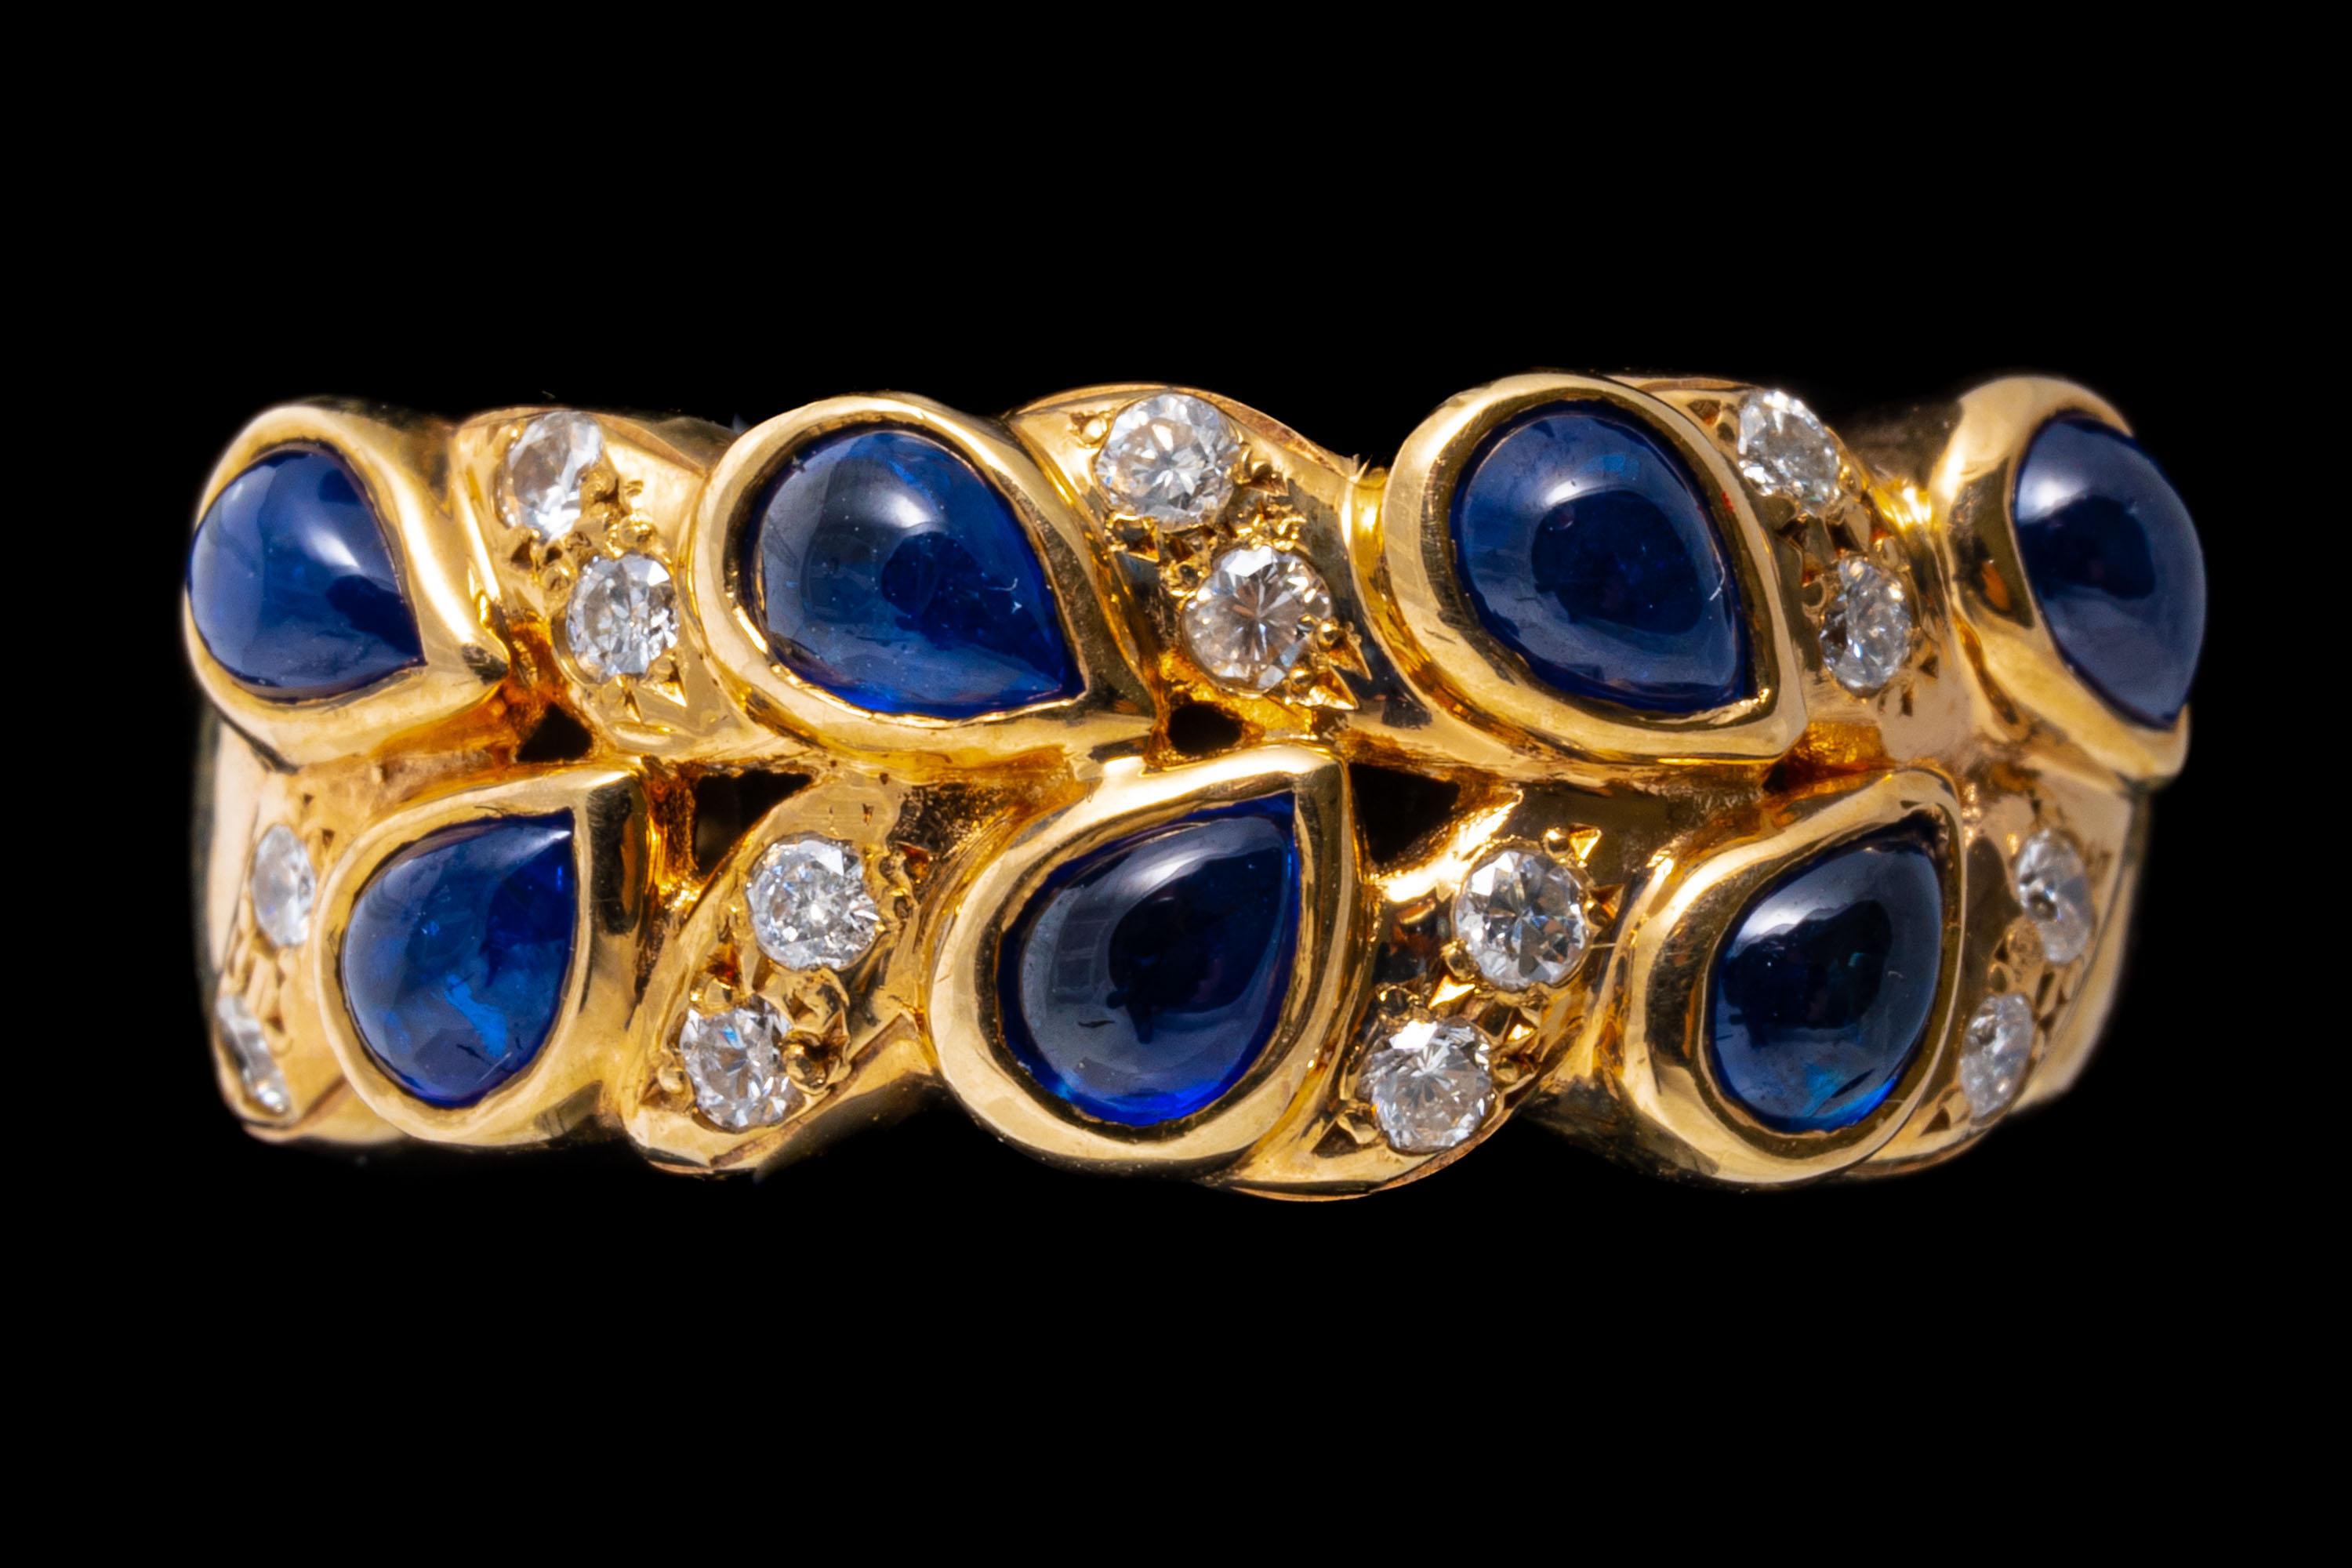 14k yellow gold ring. This handsome dome ring contains round faceted diamonds, approximately 0.14 TCW and punctuated with pear shaped cabachon cut, medium blue color sapphires, bezel set. The ring is finished by high polished shoulders.
Marks: